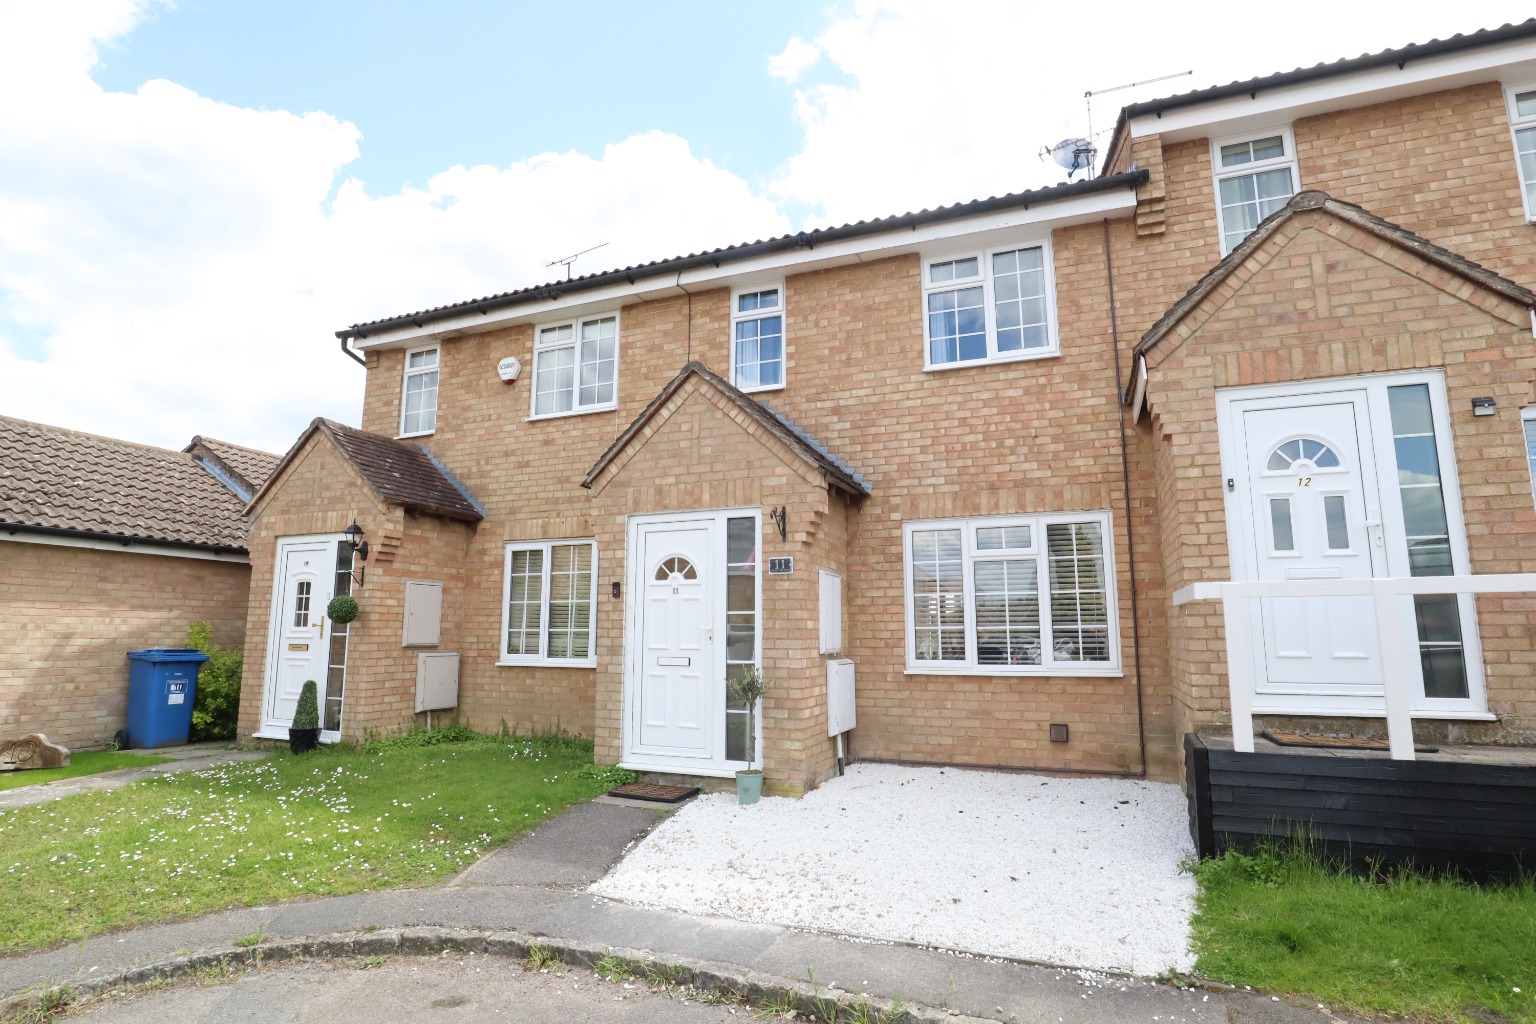 This three bedroom family home is situated at the end of a cul-de-sac location in Owlsmoor, and is presented in excellent order!